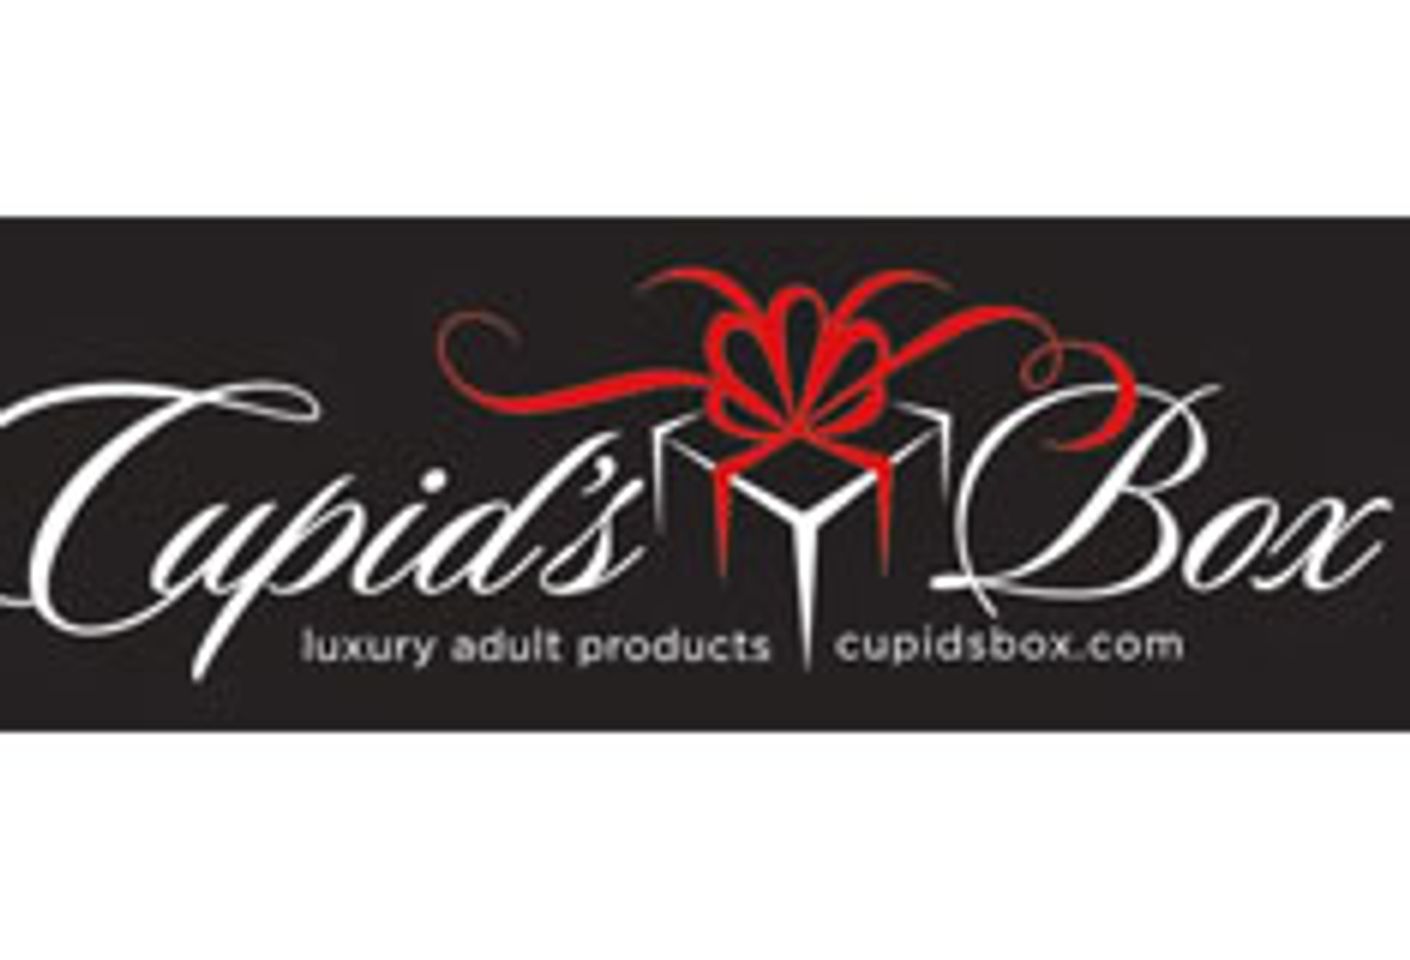 Cupidsbox.com Caters to Clients With Video, Customer Reviews, More